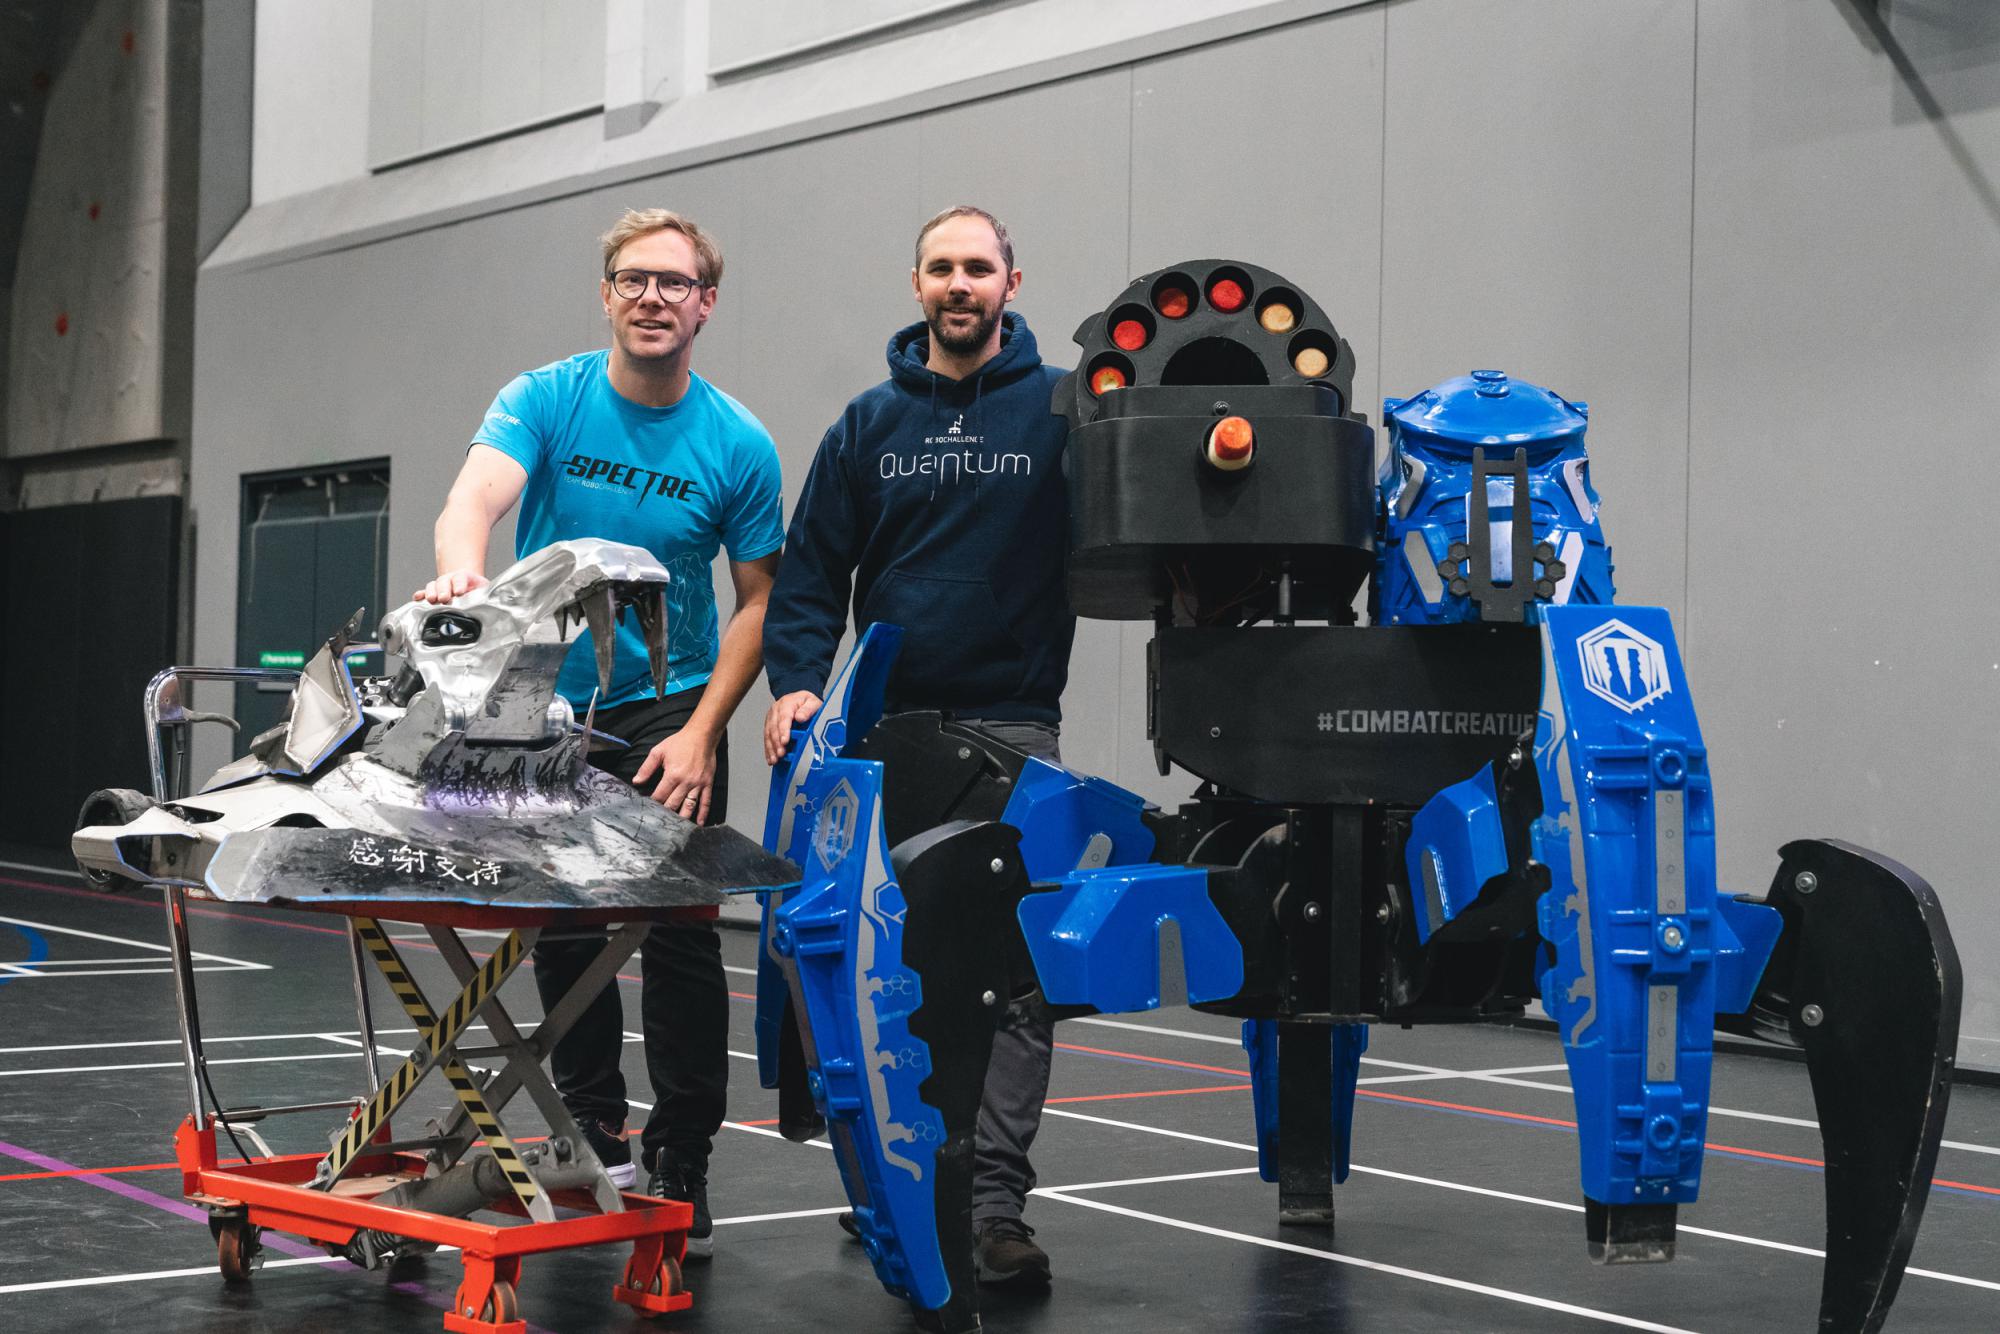 James and Grant Cooper stand with two of their custom built robots, including China's Battle of the Bots Champion Spectre